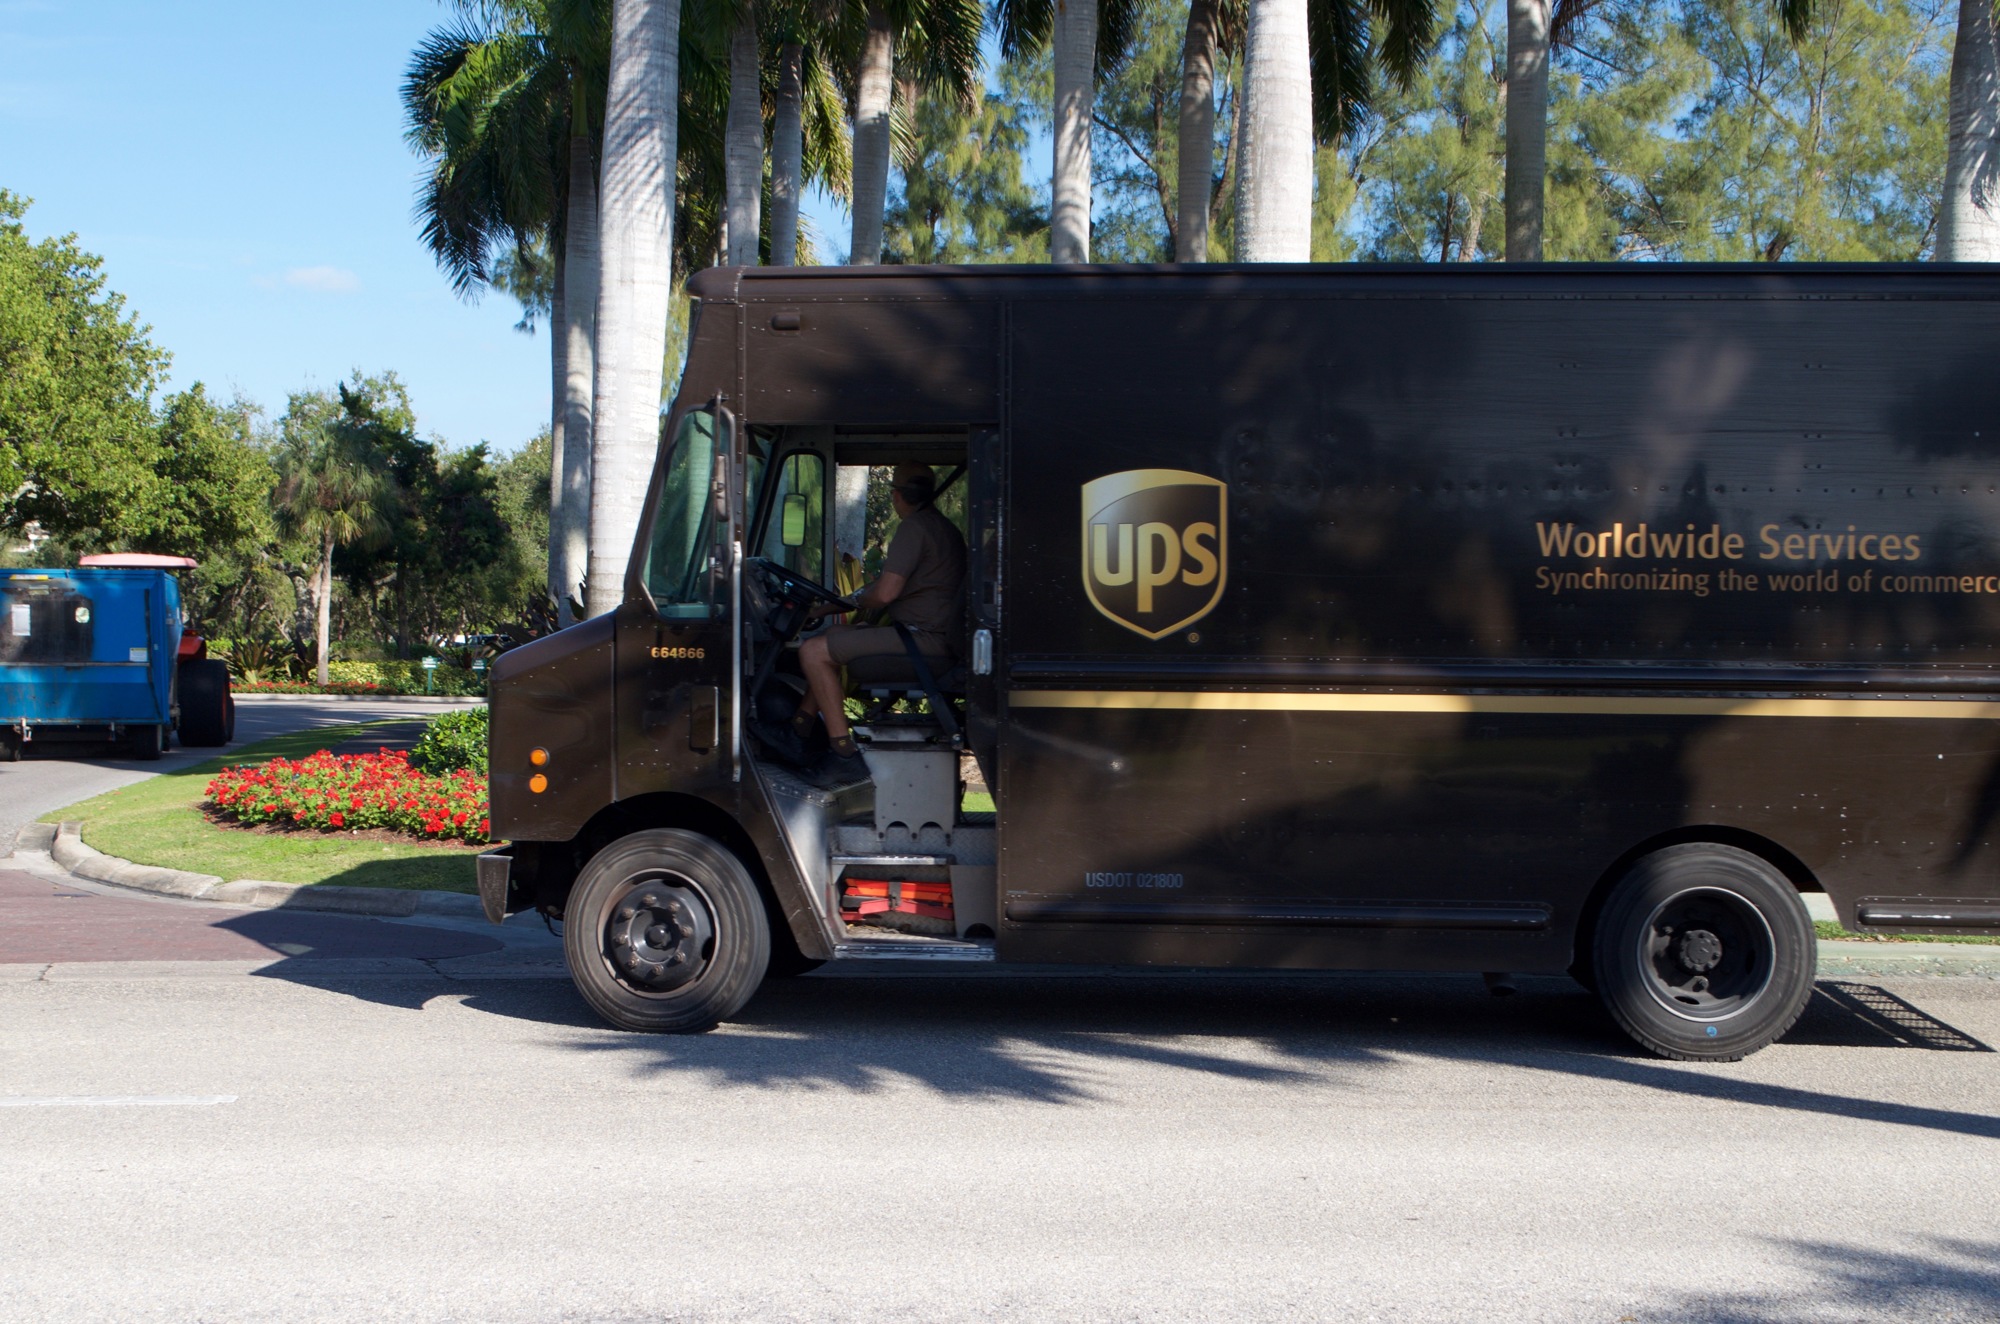 Delivery trucks are a common sight on Harbourside Drive.